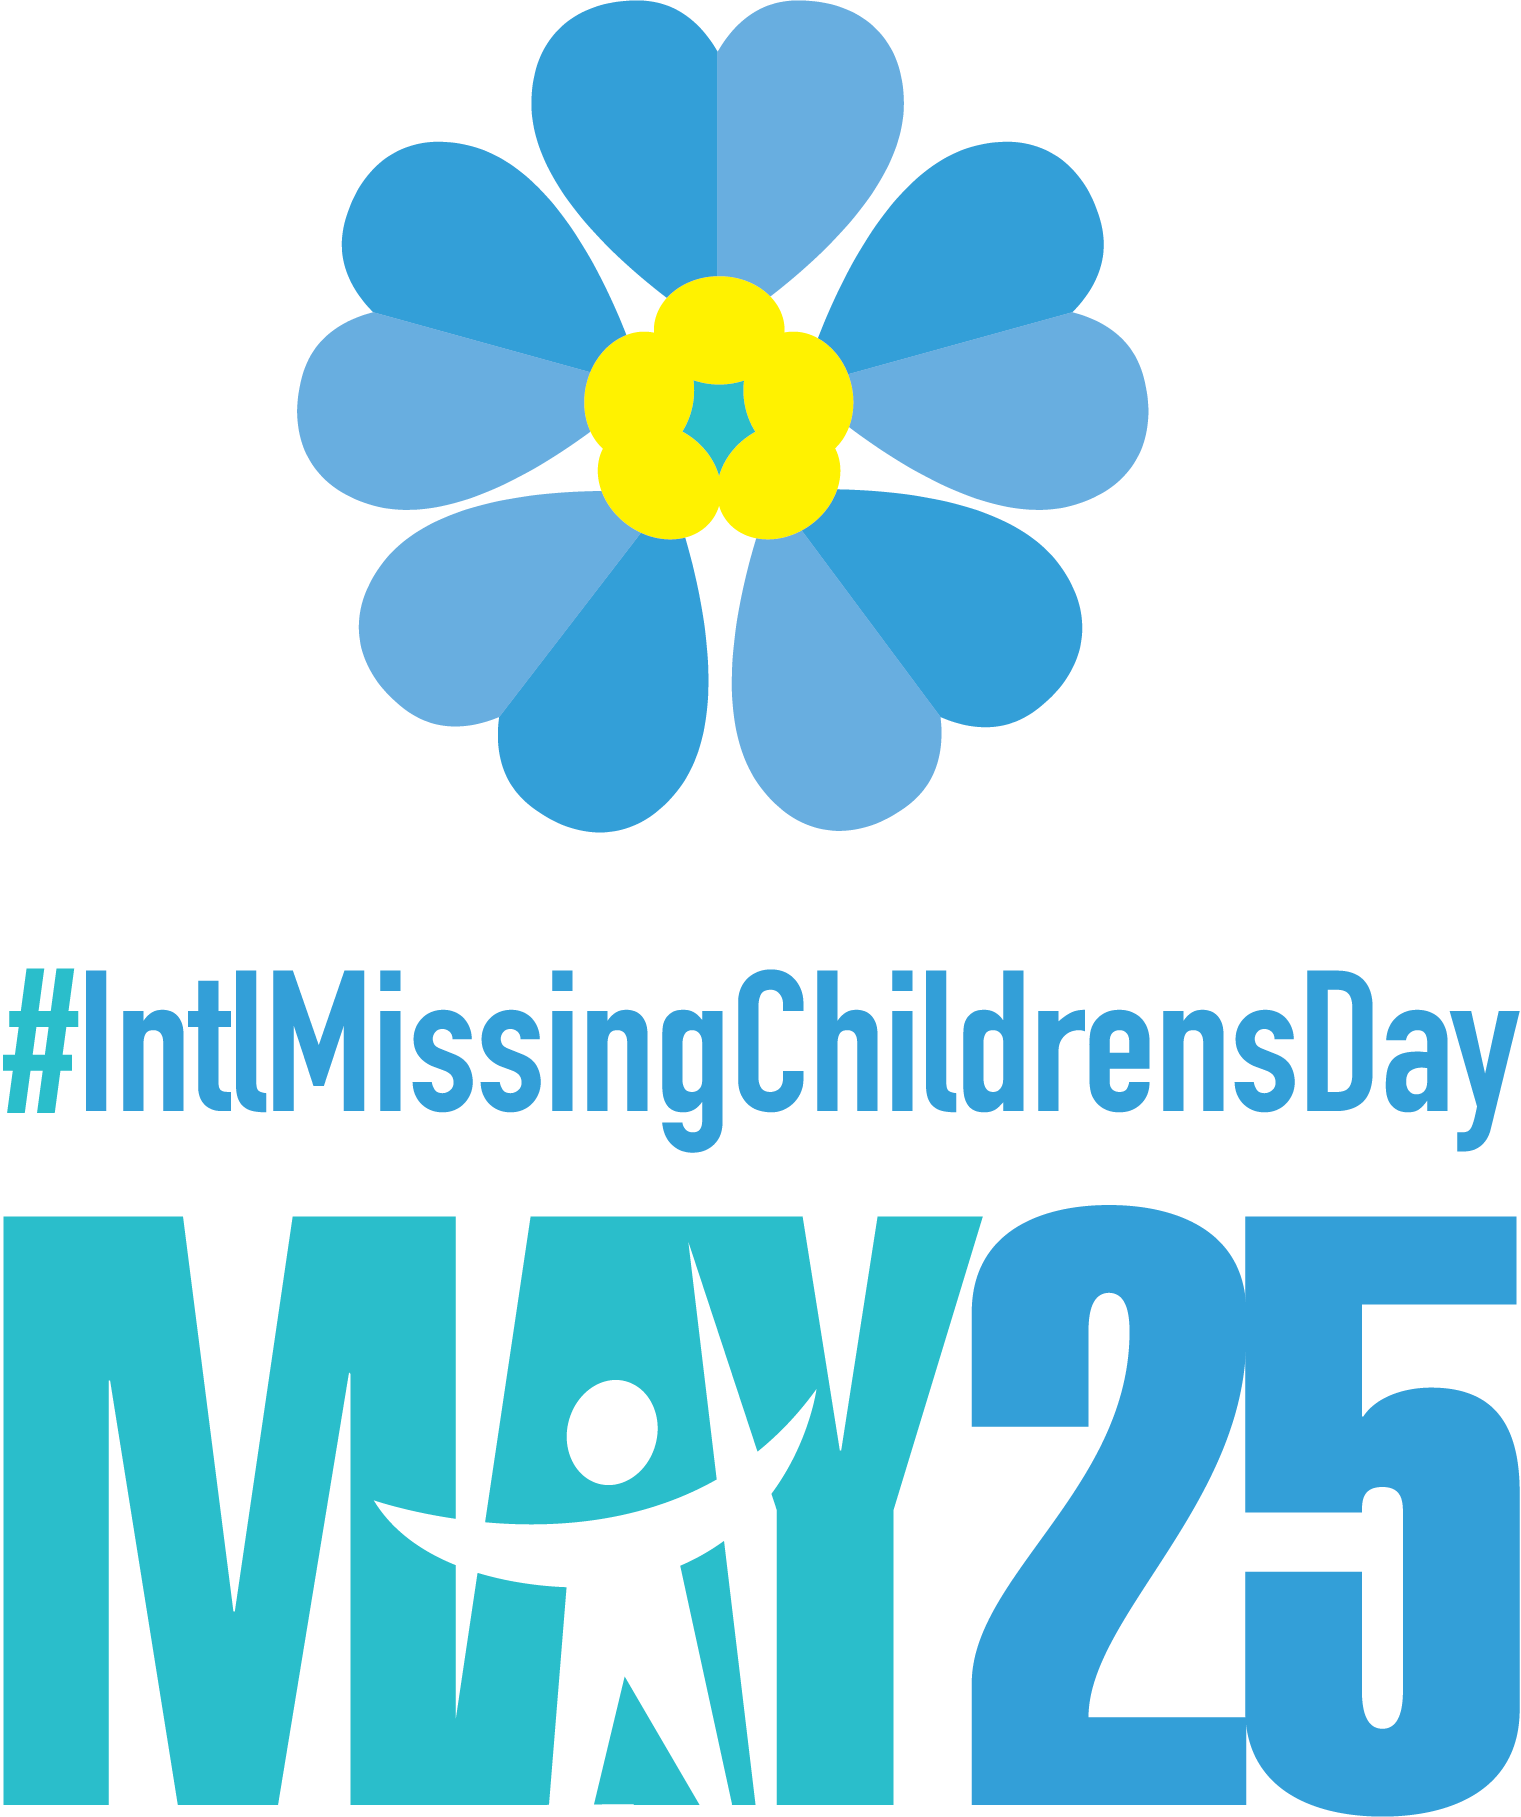 International Missing Children's Day drives urgency for a global response